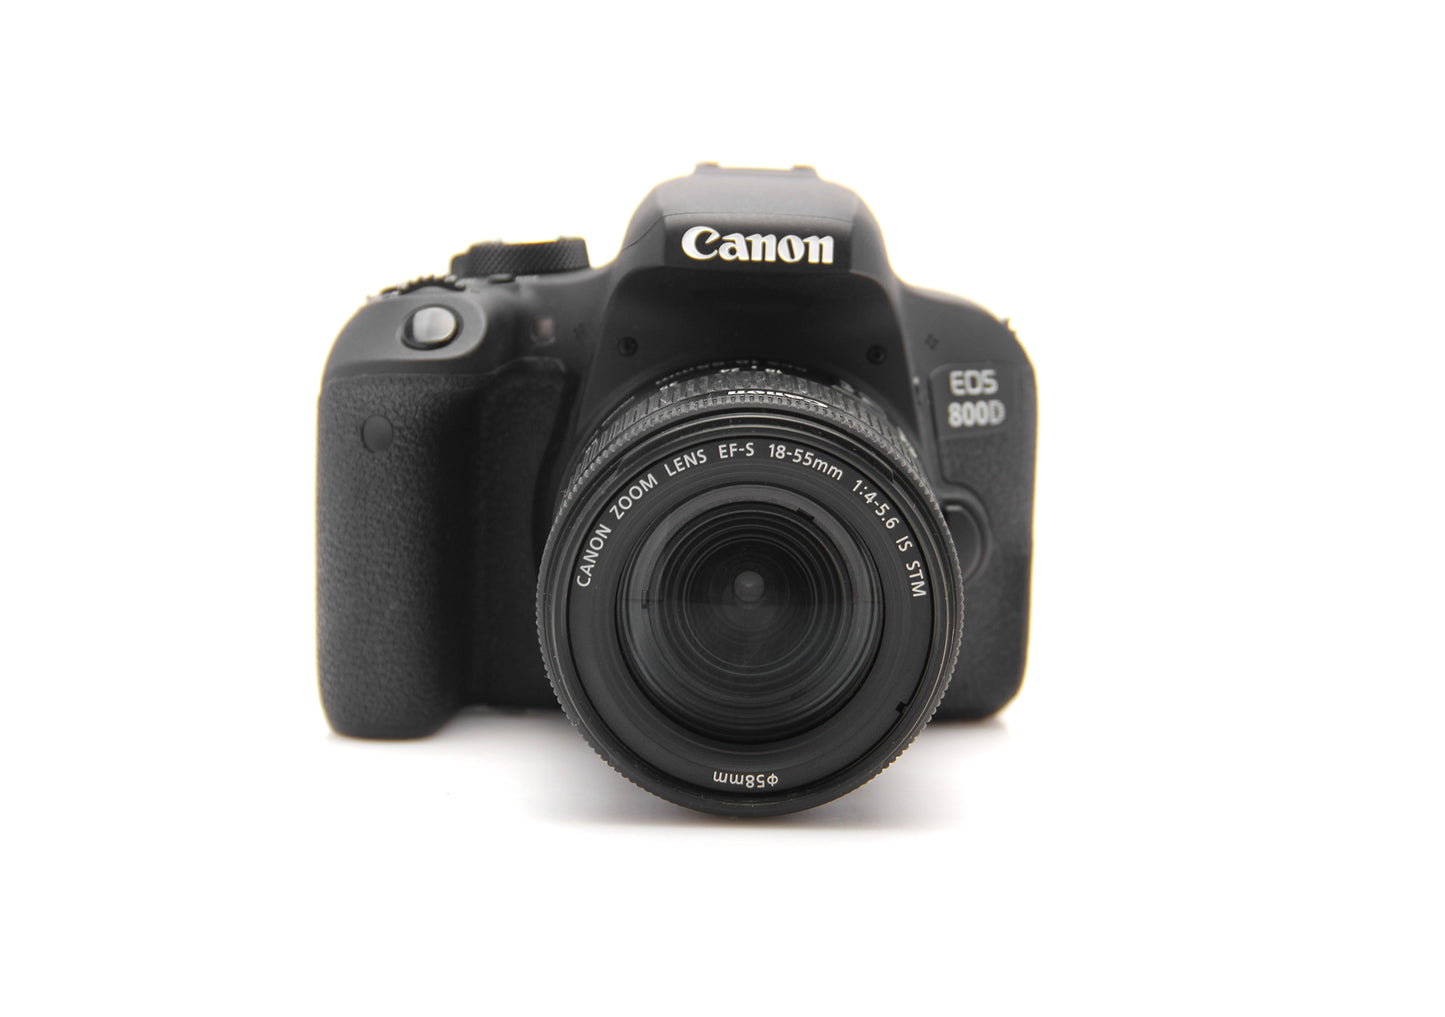 Used Canon 800D Camera With 18-55mm STM lens